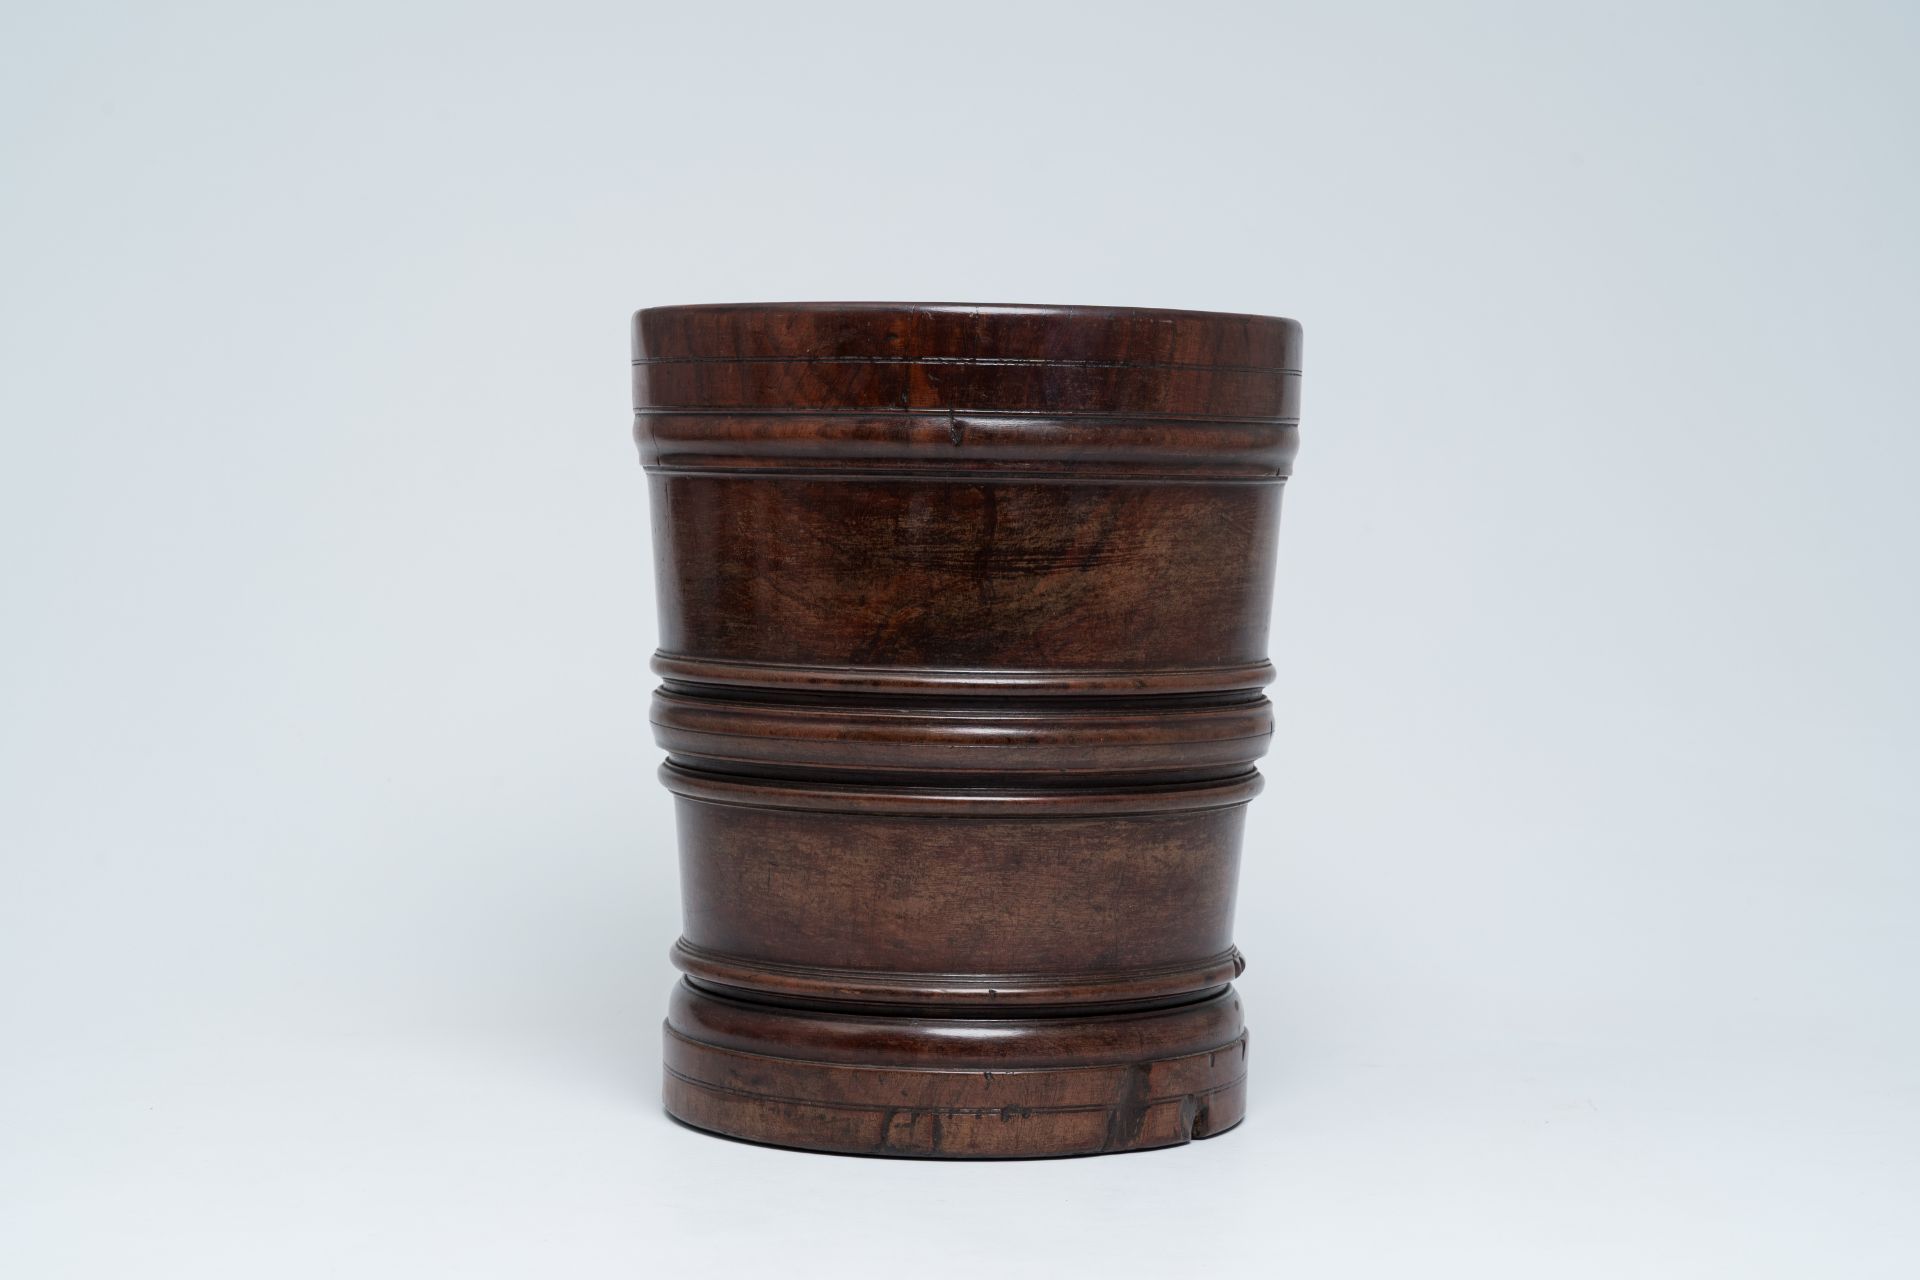 A large English turned wood mortar and pestle, second half 17th C. - Image 3 of 12